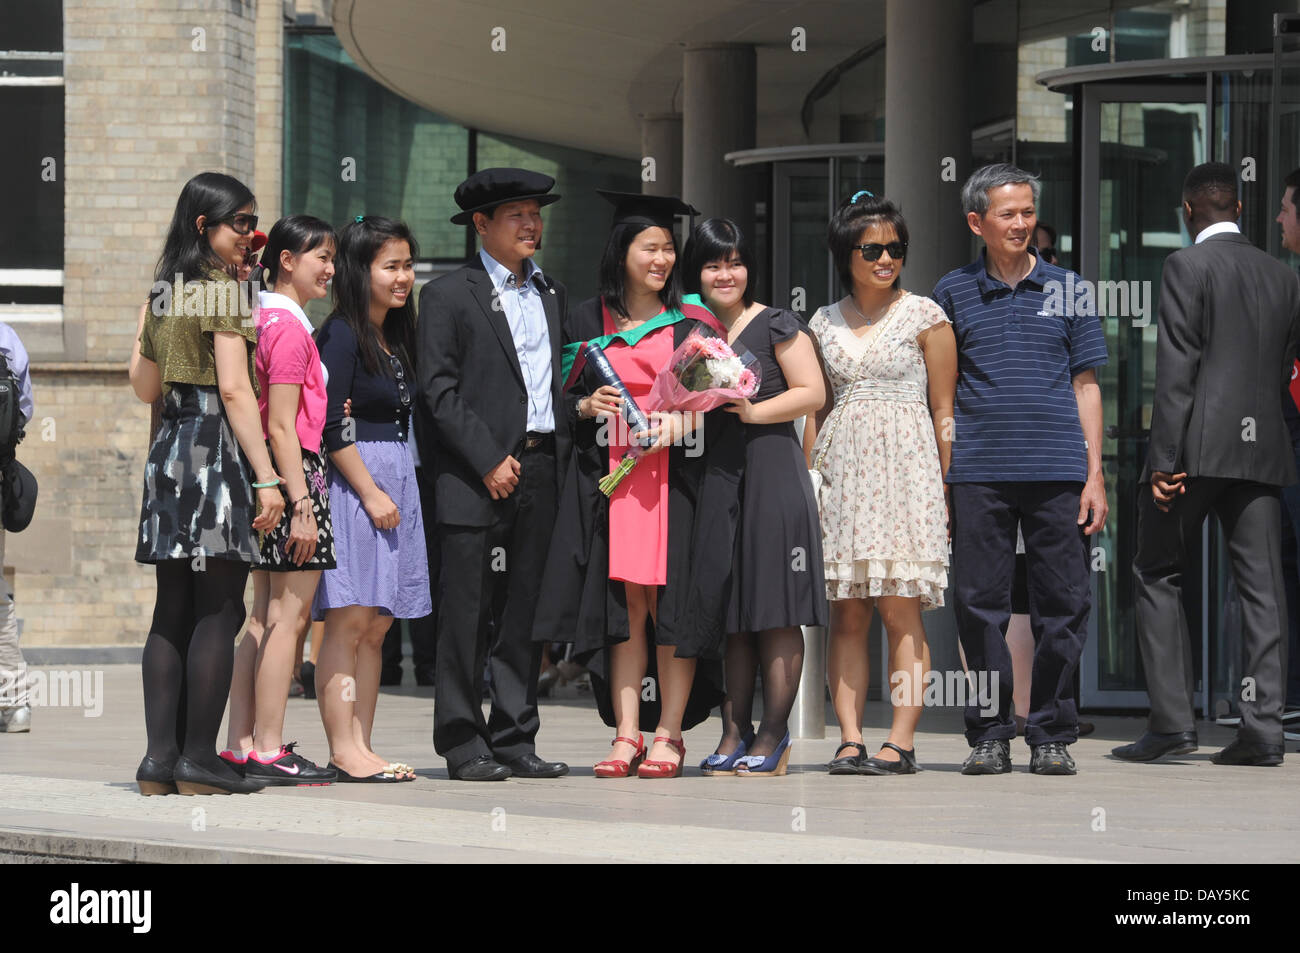 STUDENT AT A BRITISH UNIVERSITY CELEBRATING ON THEIR GRADUATION DAY POSING FOR PHOTOS WITH FAMILY MEMBERS RE EDUCATION FOREIGN Stock Photo